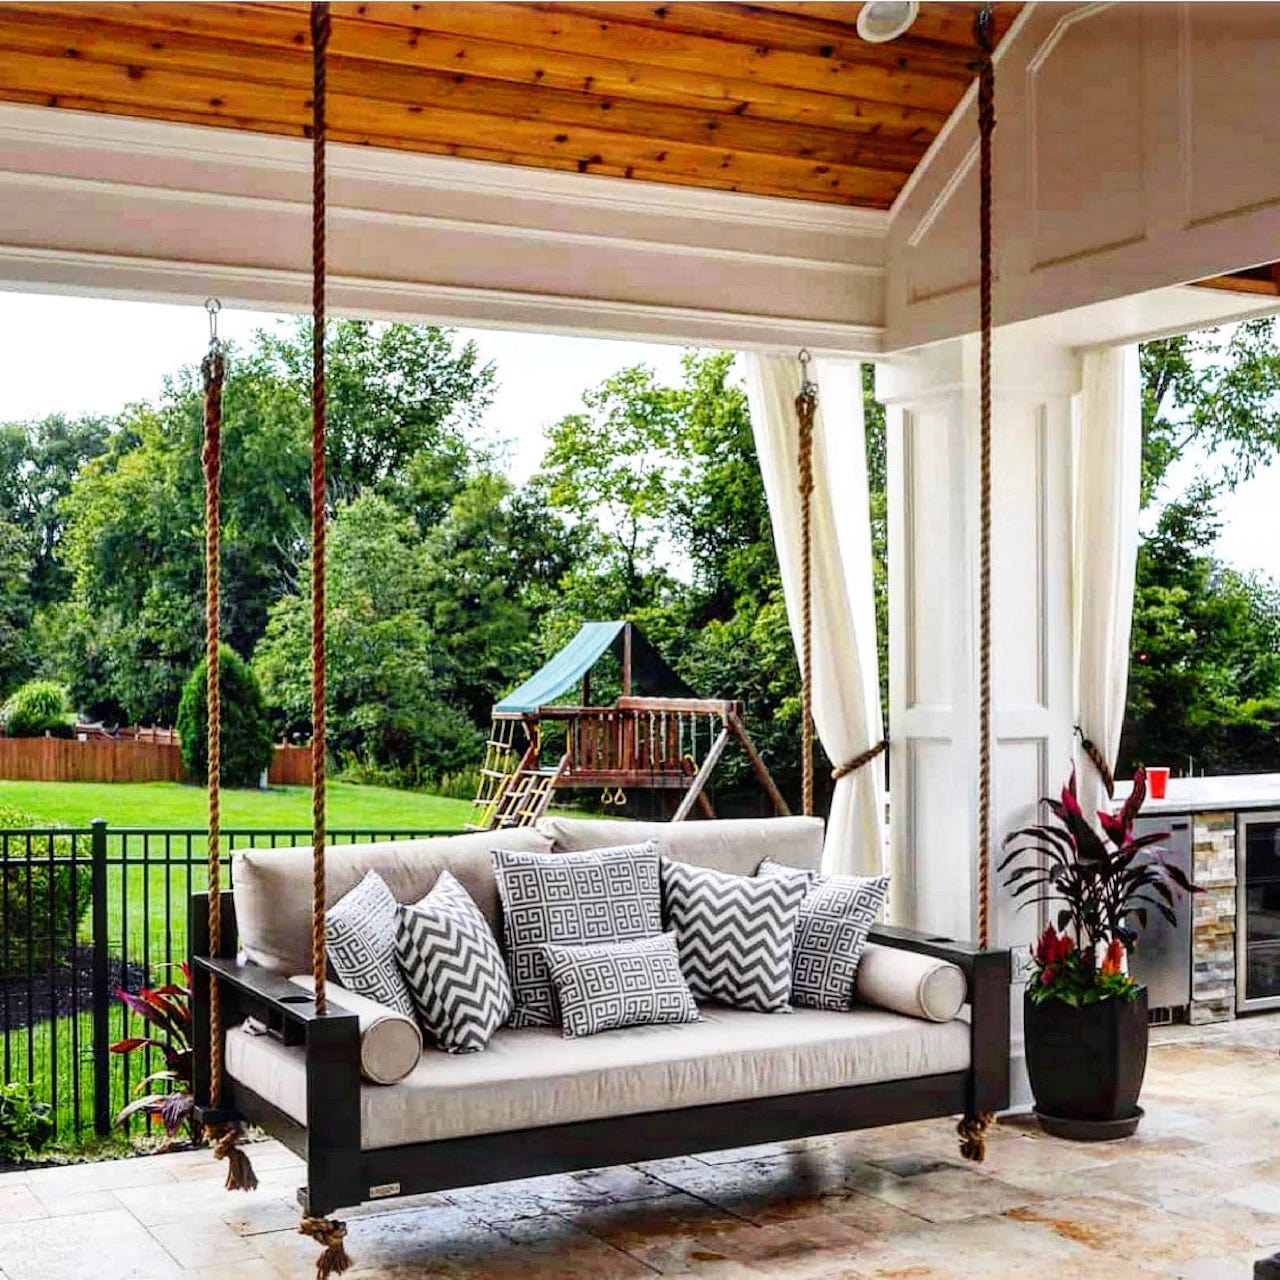 home outdoor oasis ideas daybed porch swing